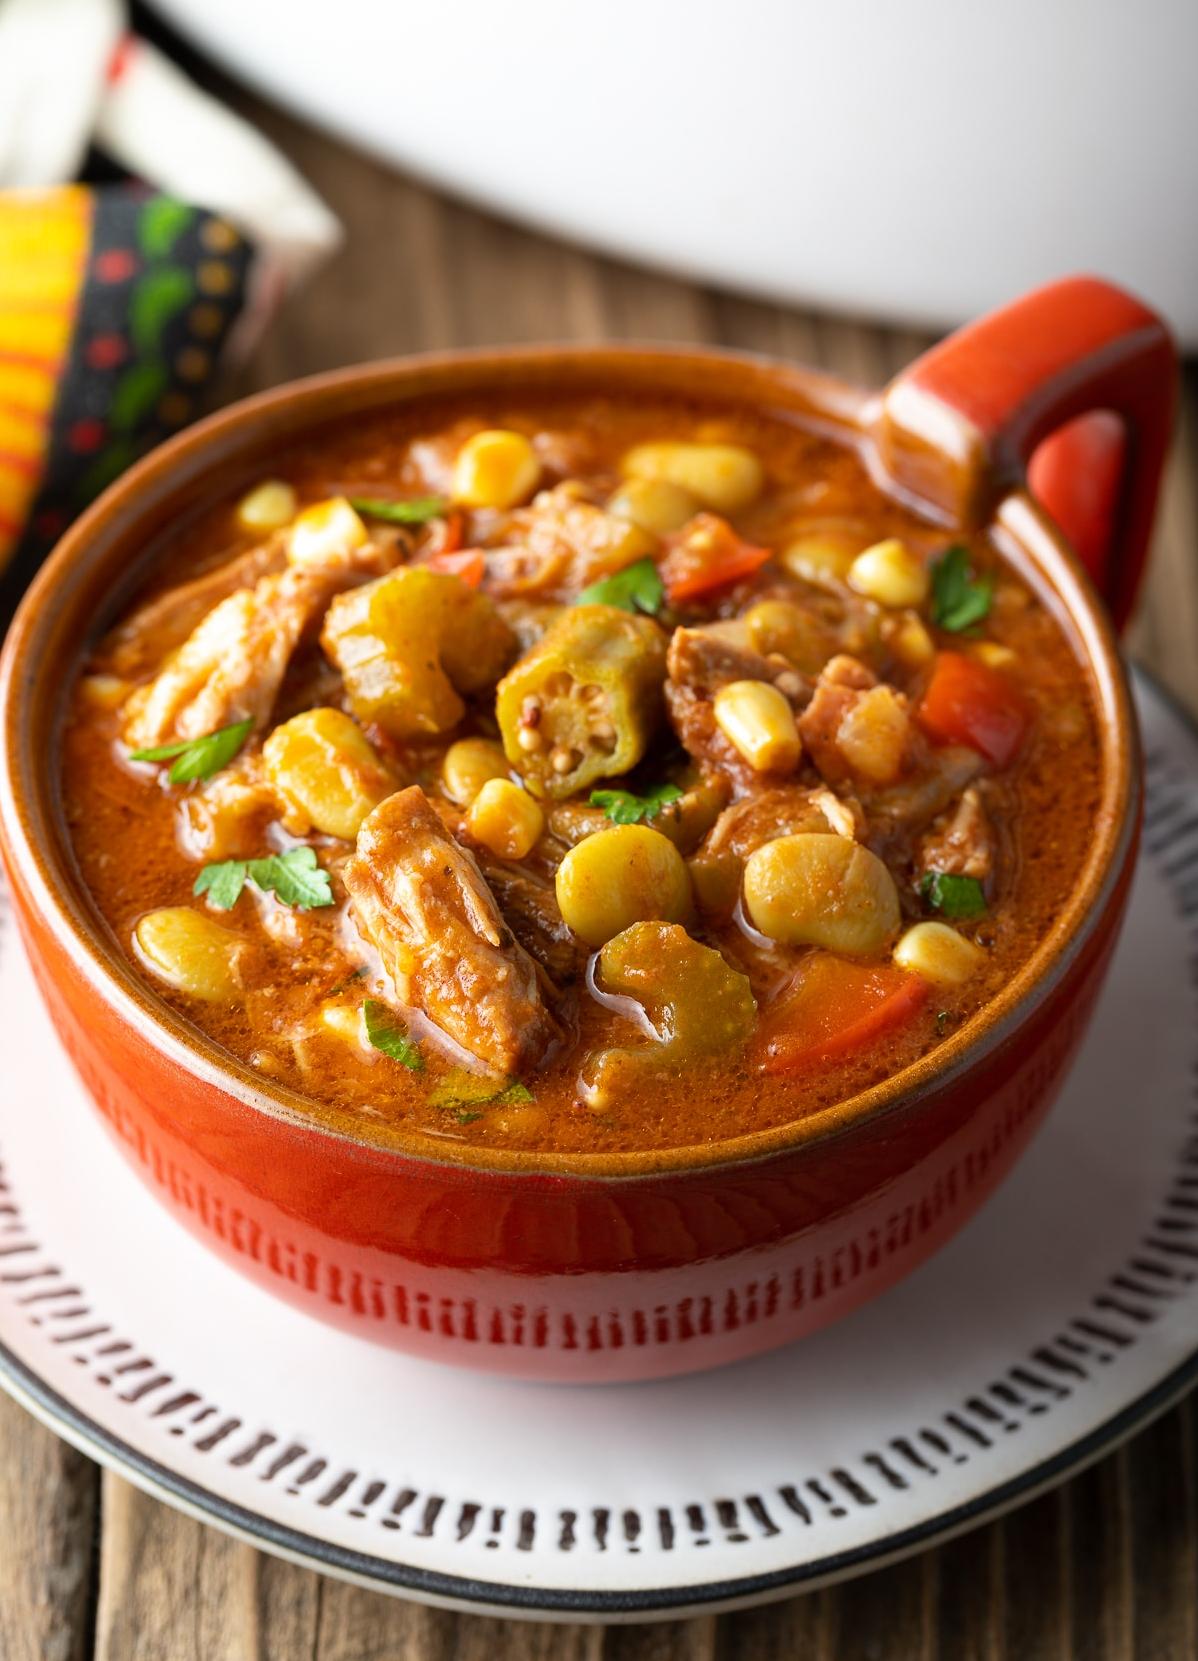  This Southern classic is a feel-good dish that’s hearty, filling, and absolutely delicious.